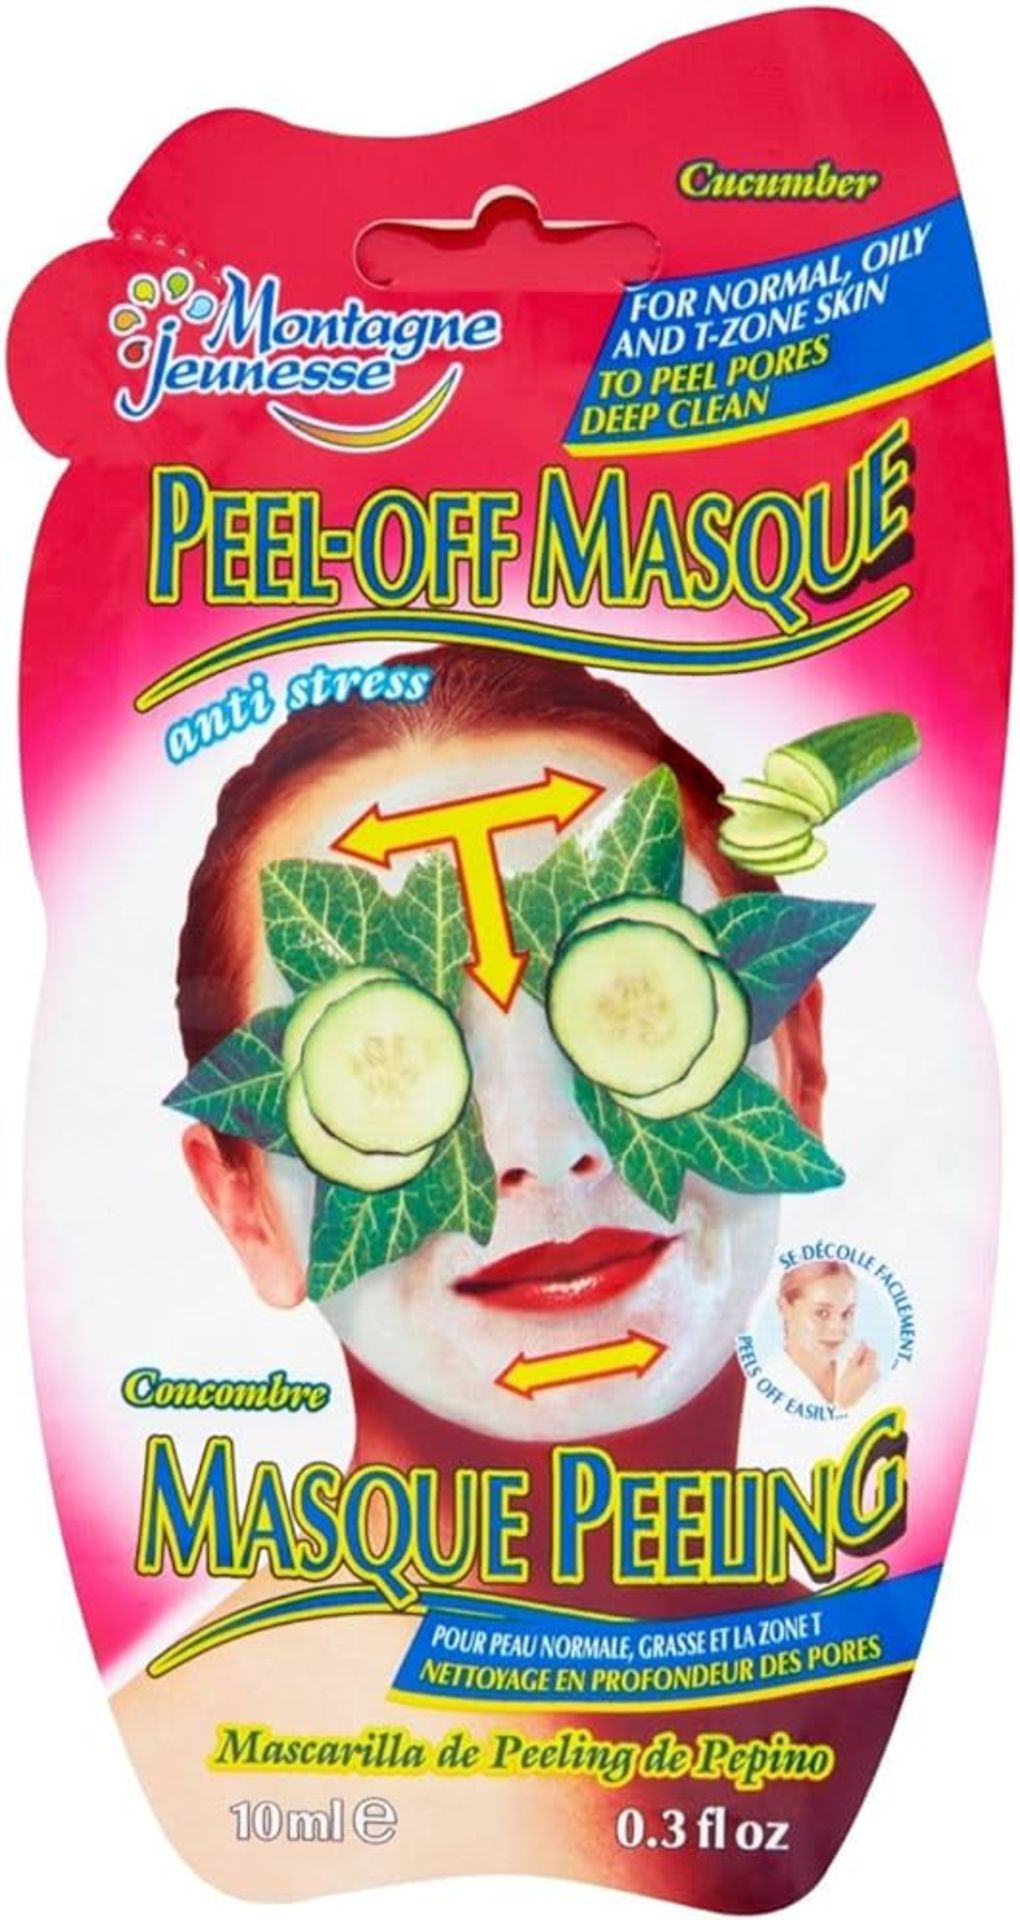 Bulk Trade Lot 2,000 x Montagne Jeunesse Face Masks. RRPs Vary from £2.50 - £6. This lot has a RRP - Image 9 of 16